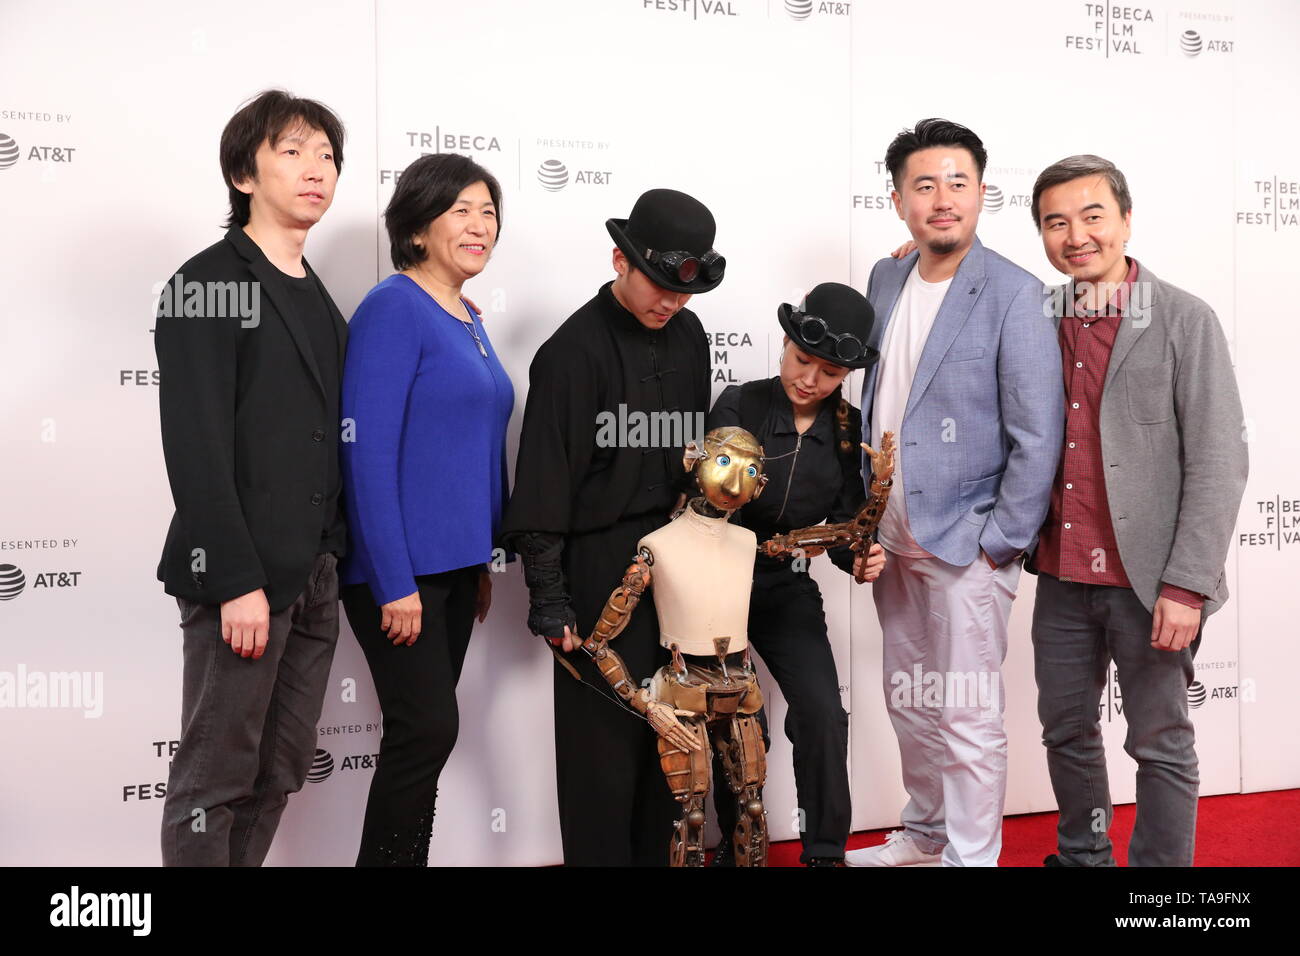 New York, USA. 28th Apr, 2019. Photo taken on April 28, 2019 shows directors S. Leo Chiang (1st R) and Sun Yang (2nd R), and other crew members posing for a group photo on the red carpet during the premiere of Chinese documentary 'Our Time Machine', in New York, the United States. 'Our Time Machine' is a touching Chinese documentary which described how Ma, a renowned Chinese photographer and artist in Shanghai, got closer to his father, managed to stick to his creative career despite various challenges, and found the true meaning of life. Credit: Luo Jingjing/Xinhua/Alamy Live News Stock Photo